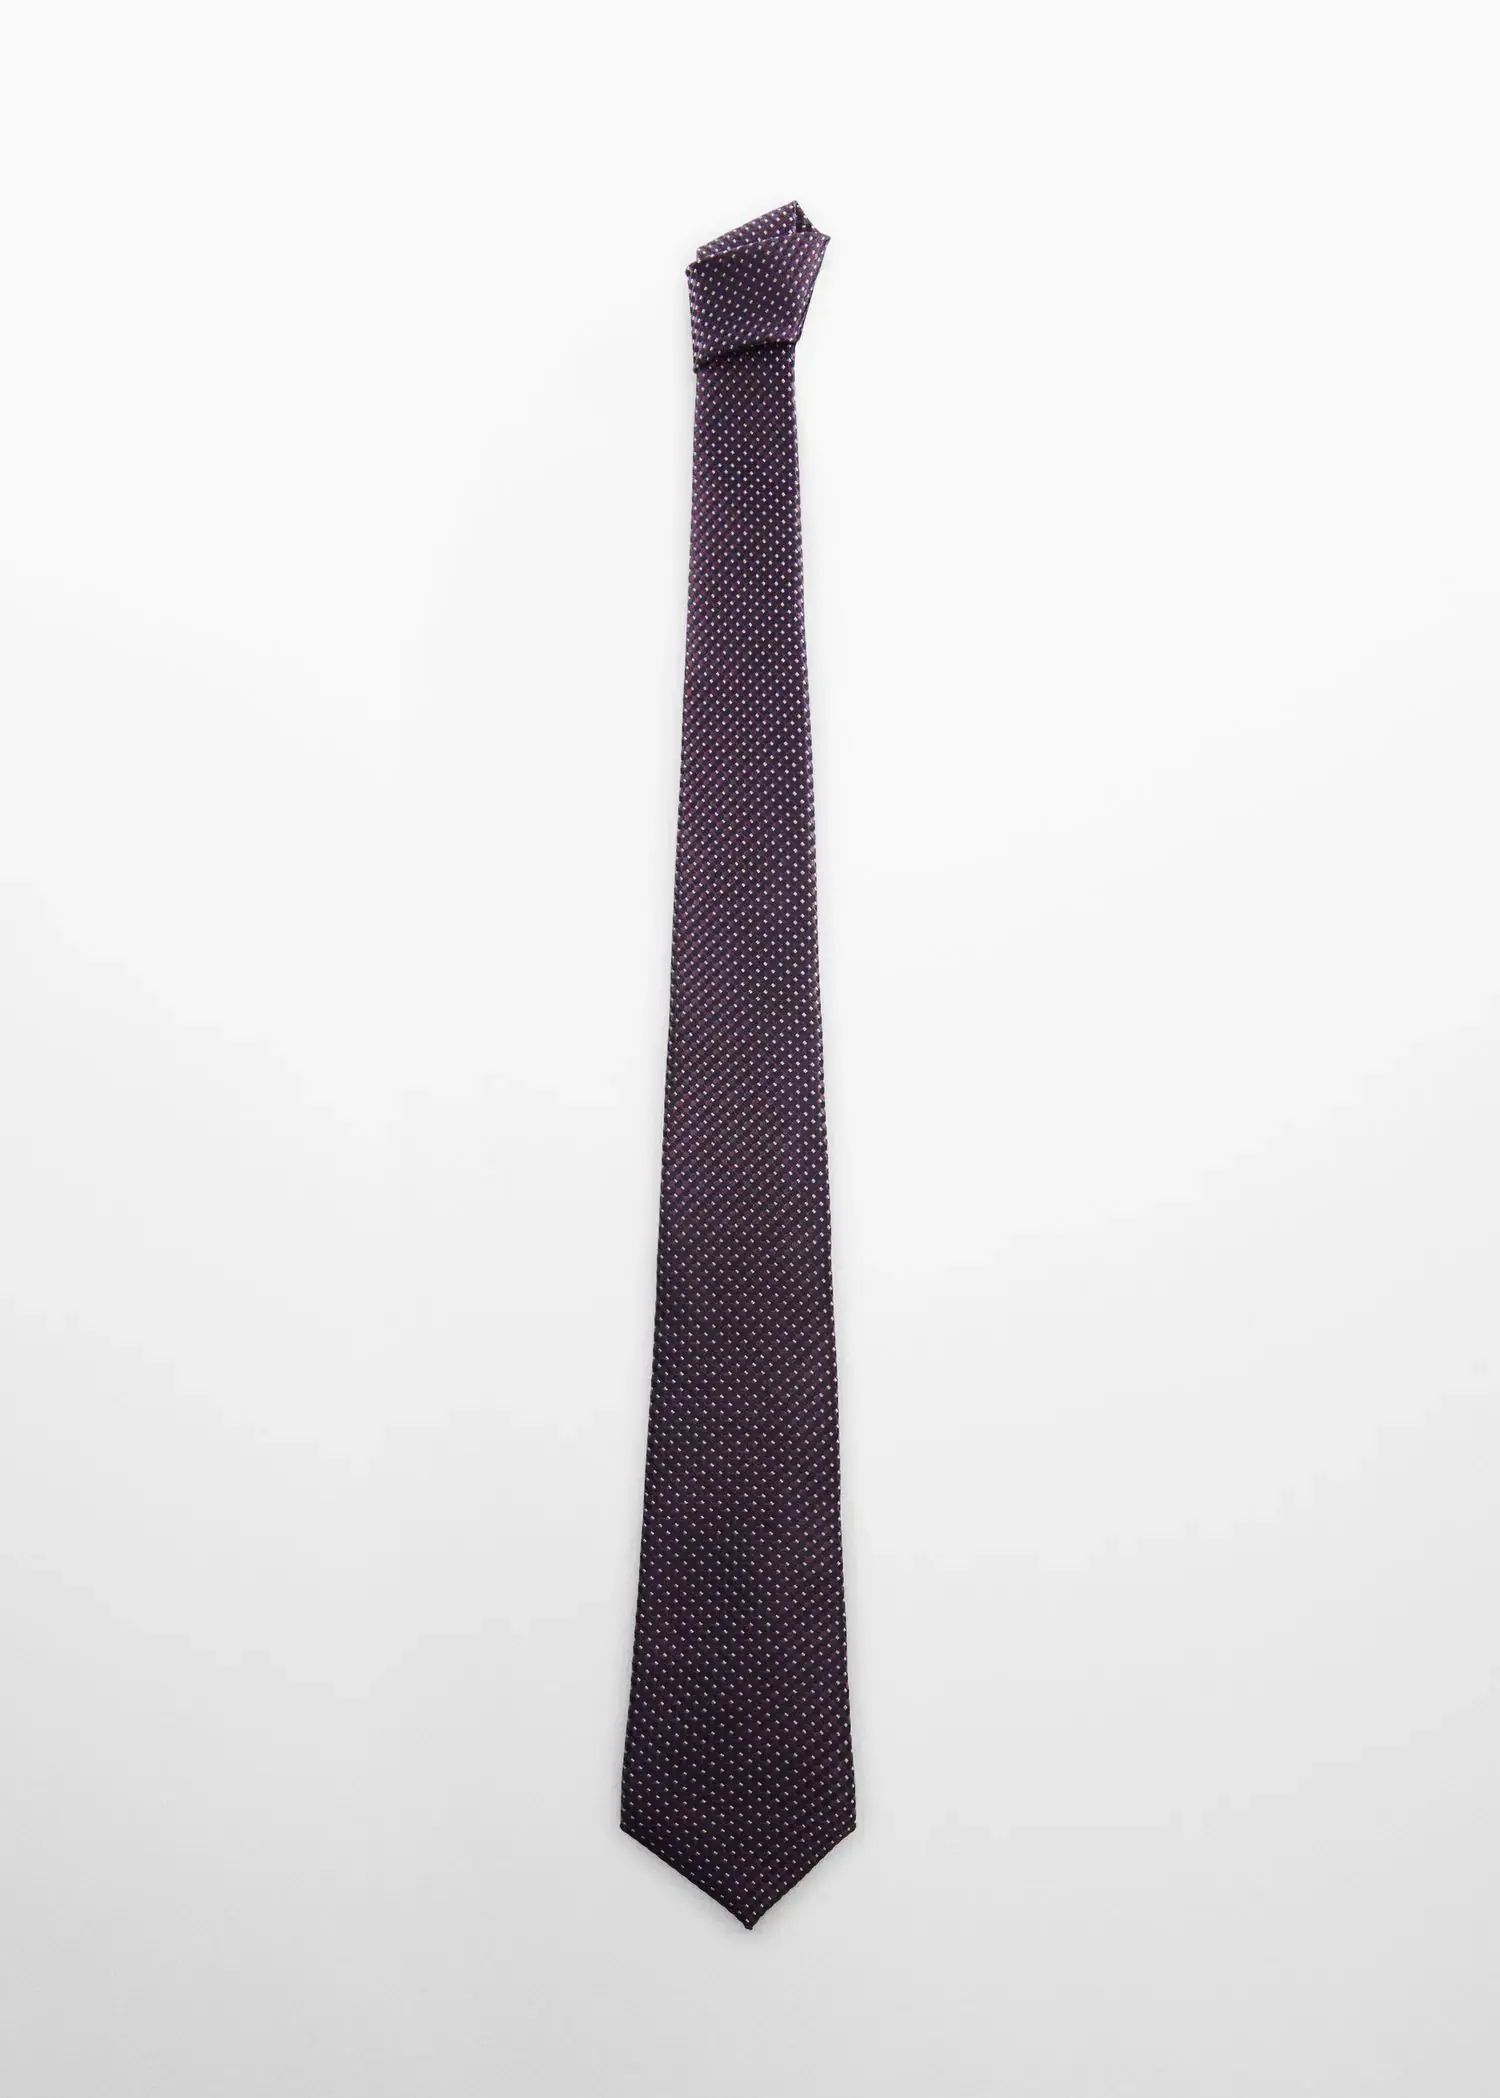 Mango Tie with micro polka-dot structure. a purple tie on a white background. 